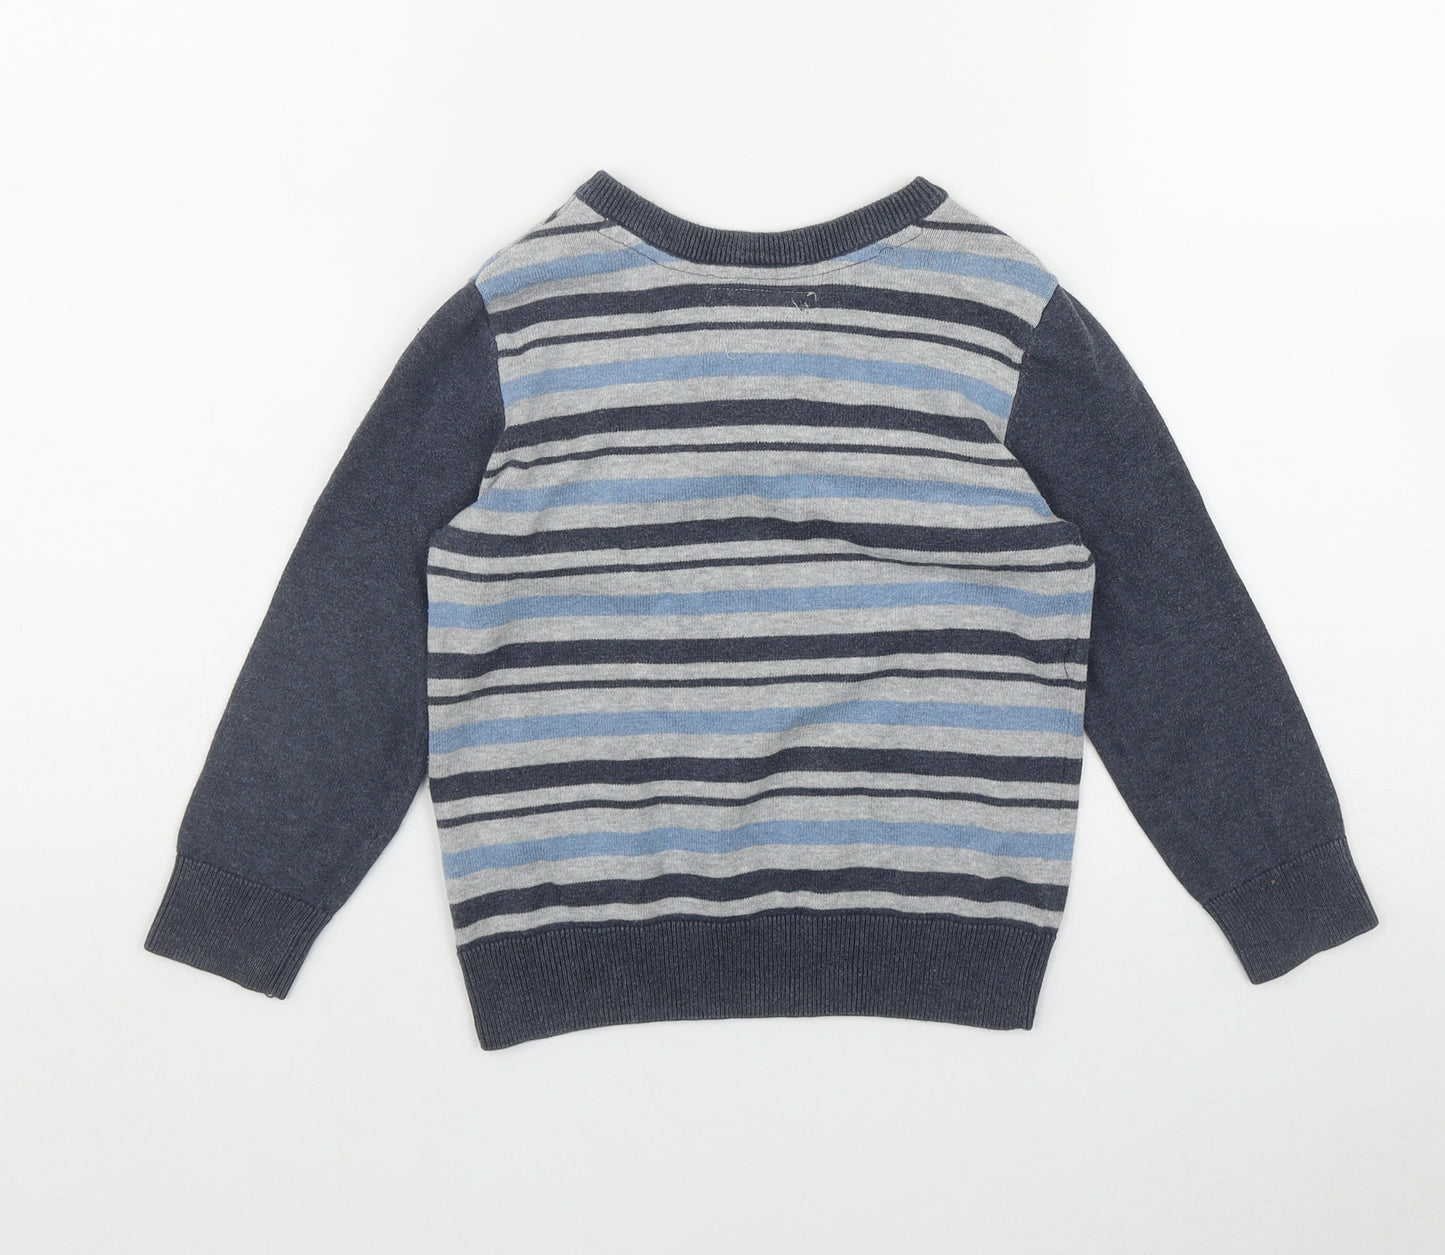 Matalan Boys Blue V-Neck Striped Cotton Pullover Jumper Size 5 Years  Button